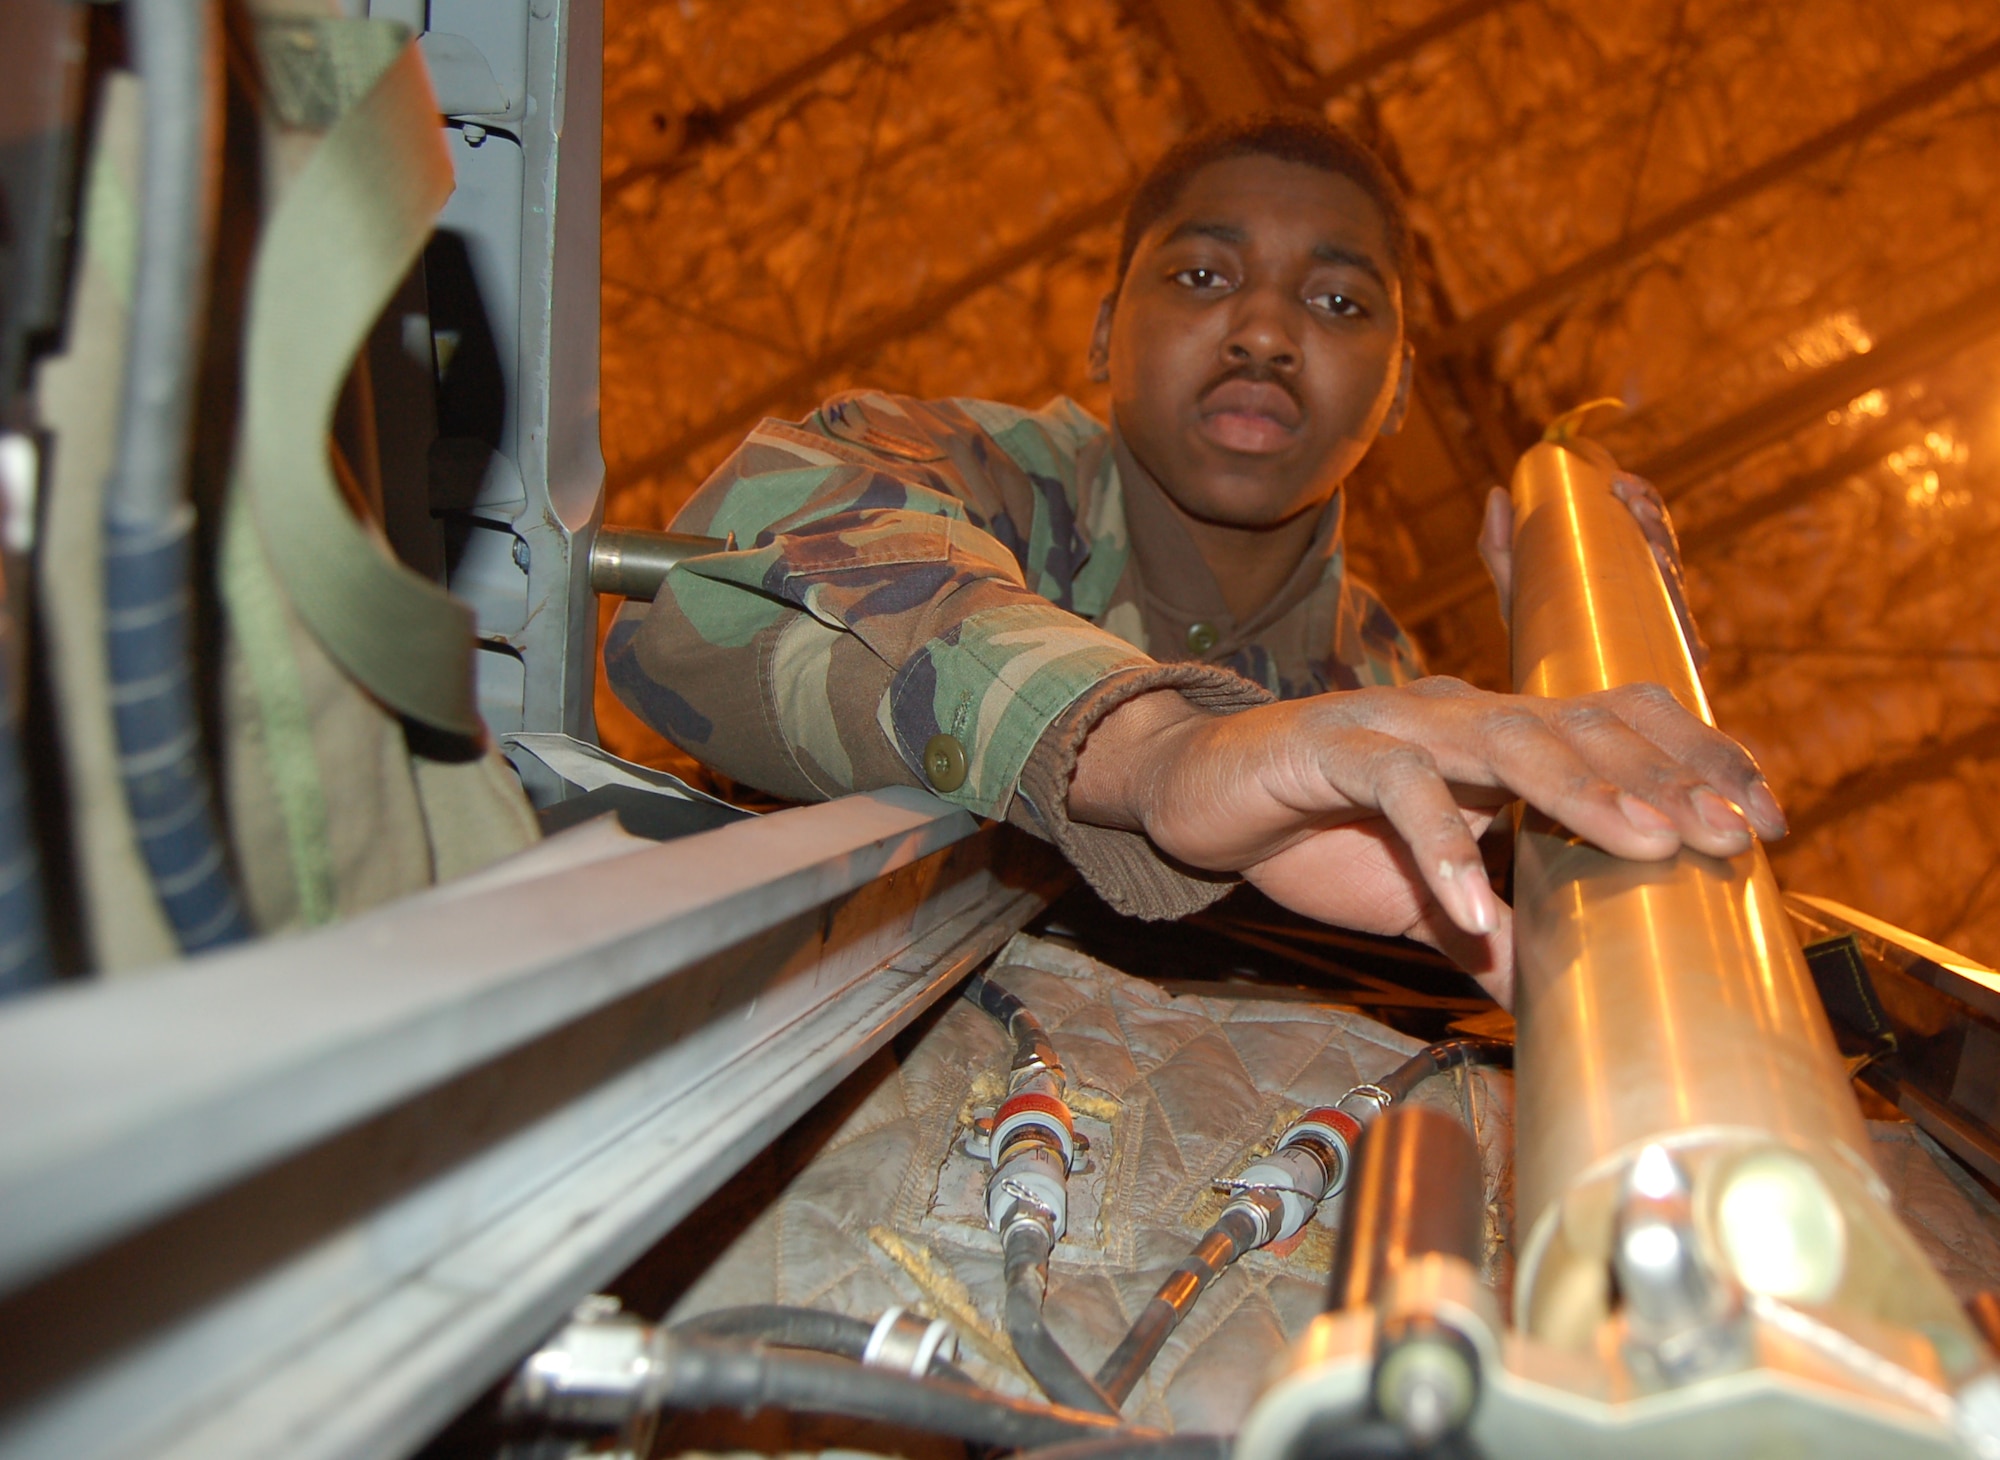 Airman 1st Class Keith Billings verifies the ballistic fitting elbows on a CKU-5B/A rocket catapult are in their proper place during the egress portion of an aircraft transfer inspection Feb. 22 at Elmendorf Air Force Base, Alaska. The rocket catapult ejects the seat in the F-15E Strike Eagle at 43 feet per second. This is part of the aircraft transfer inspection is one of the steps changed under Elmendorf AFB's Air Force Smart Operations for the 21st century aircraft transfer program. Instead of taking 10 days, the inspection is now complete in three. Airman Billings is an aircrew egress journeyman with the 3rd Component Maintenance Squadron. (U.S. Air Force photo/Staff Sgt. Matthew Rosine) 
